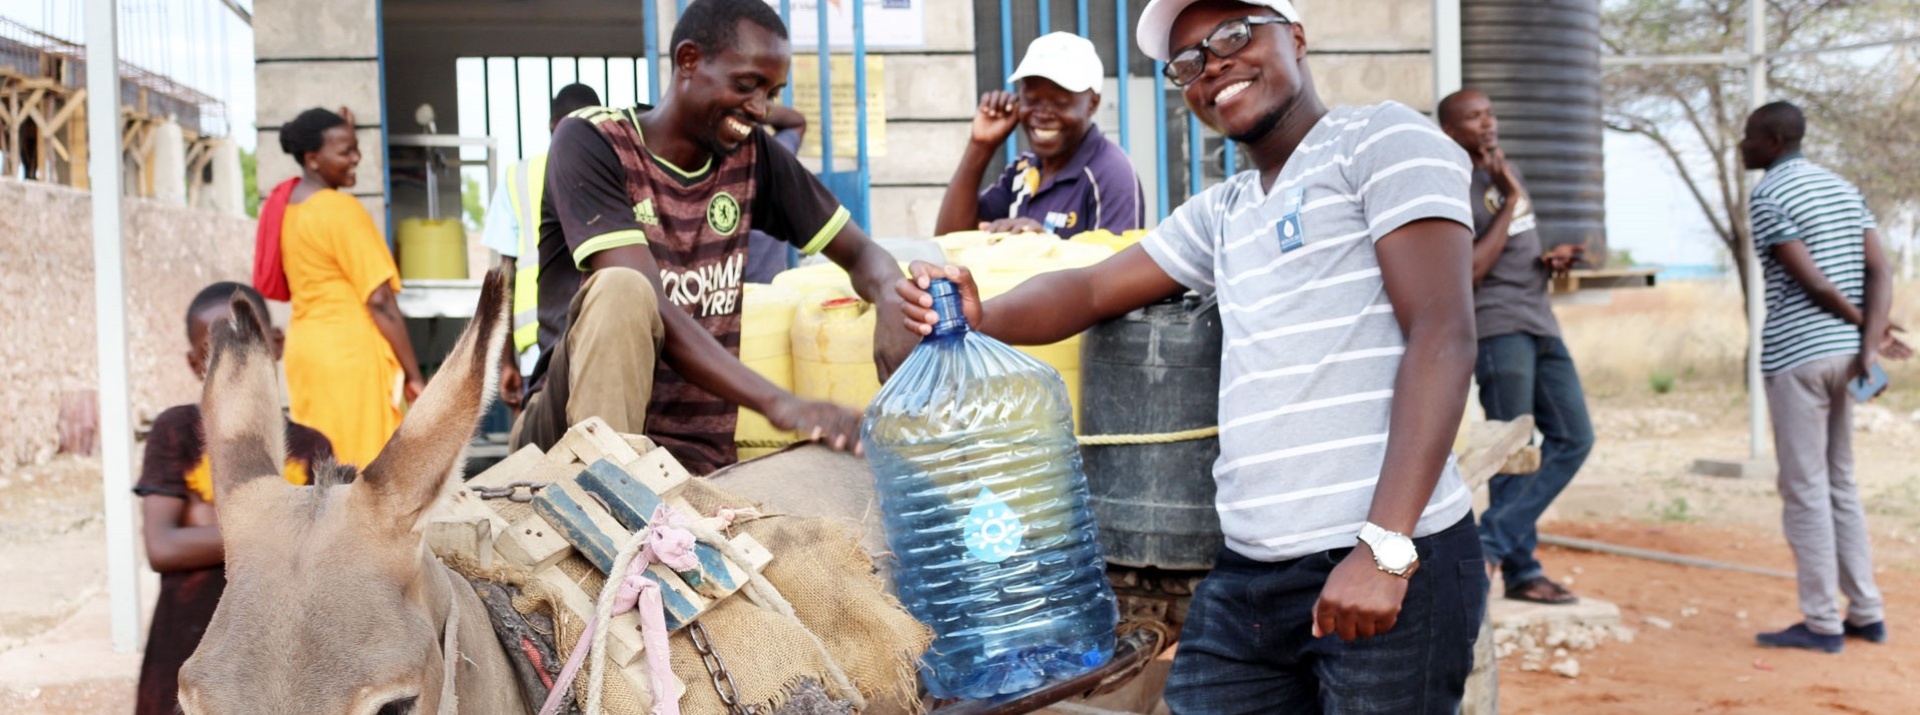 Two Kenyan young men stand laughing with a donkey in front of a WaterKiosk and attach a large bottle of drinking water to the donkey's back.